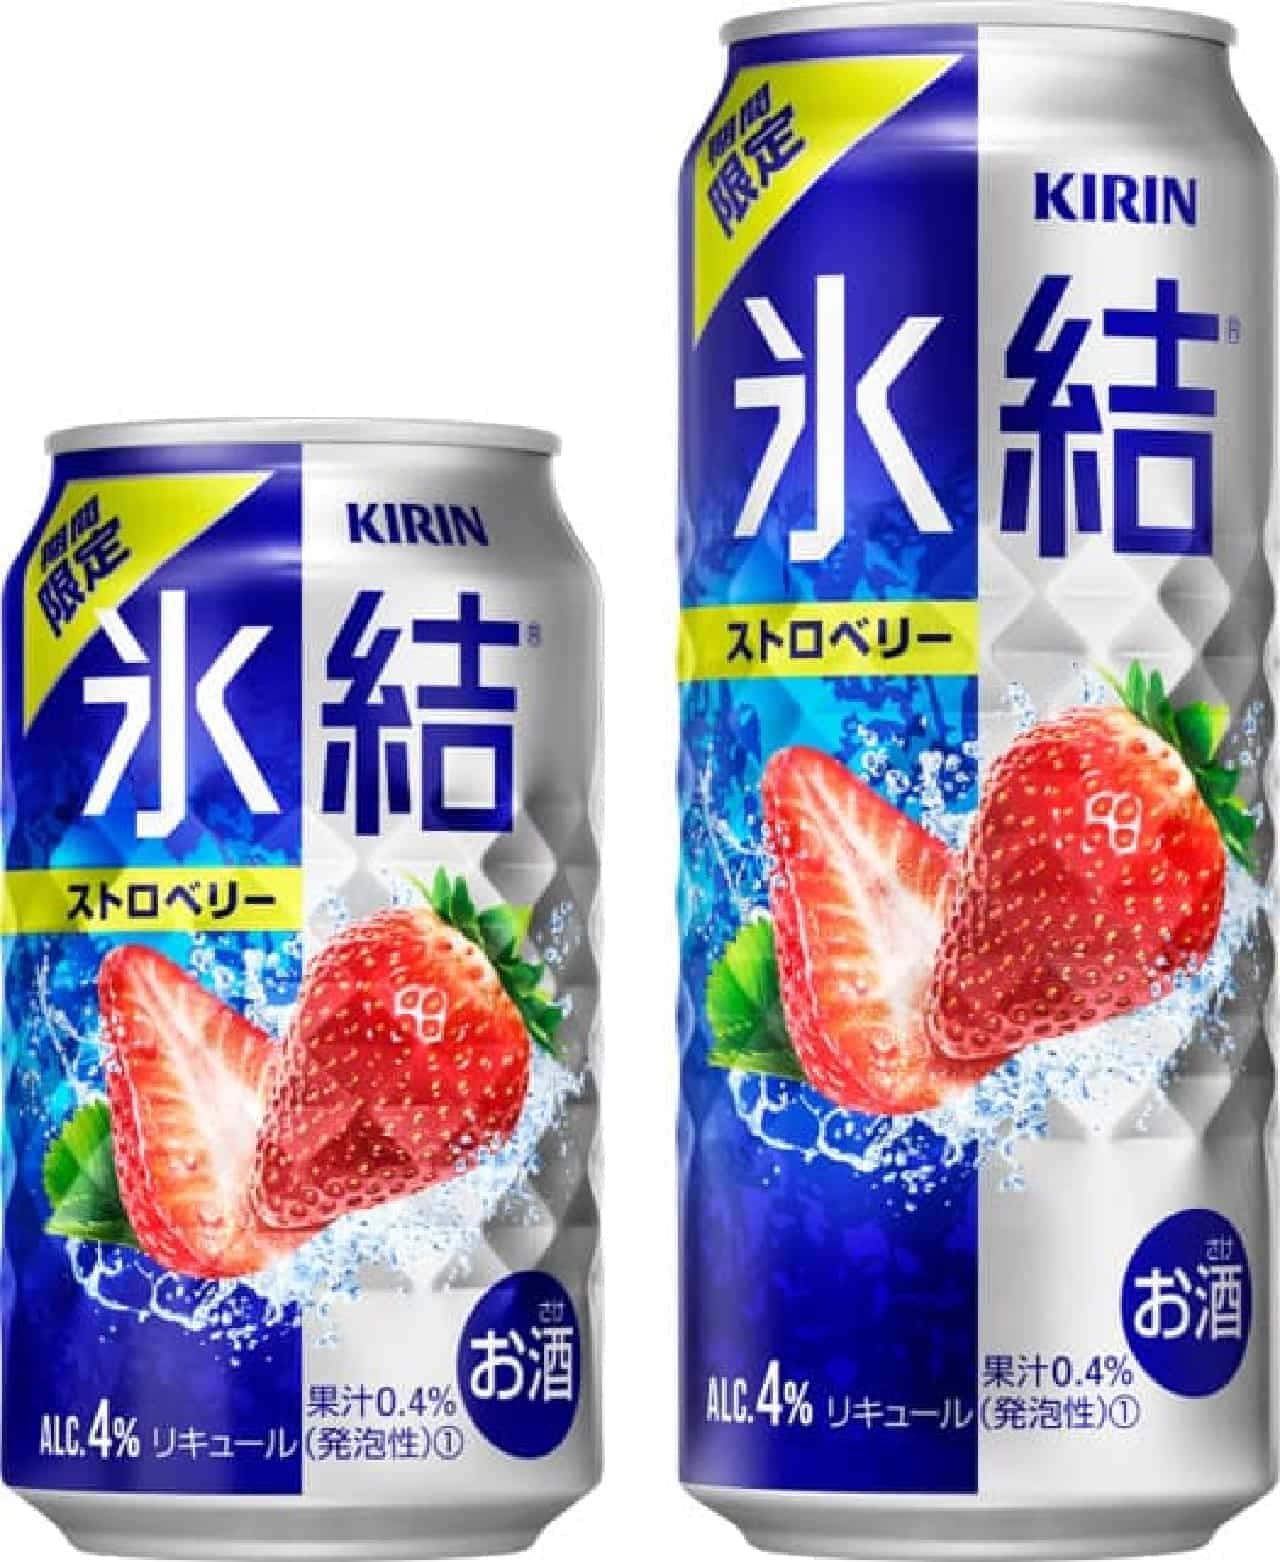 Kirin Freeze Strawberry (for a limited time)